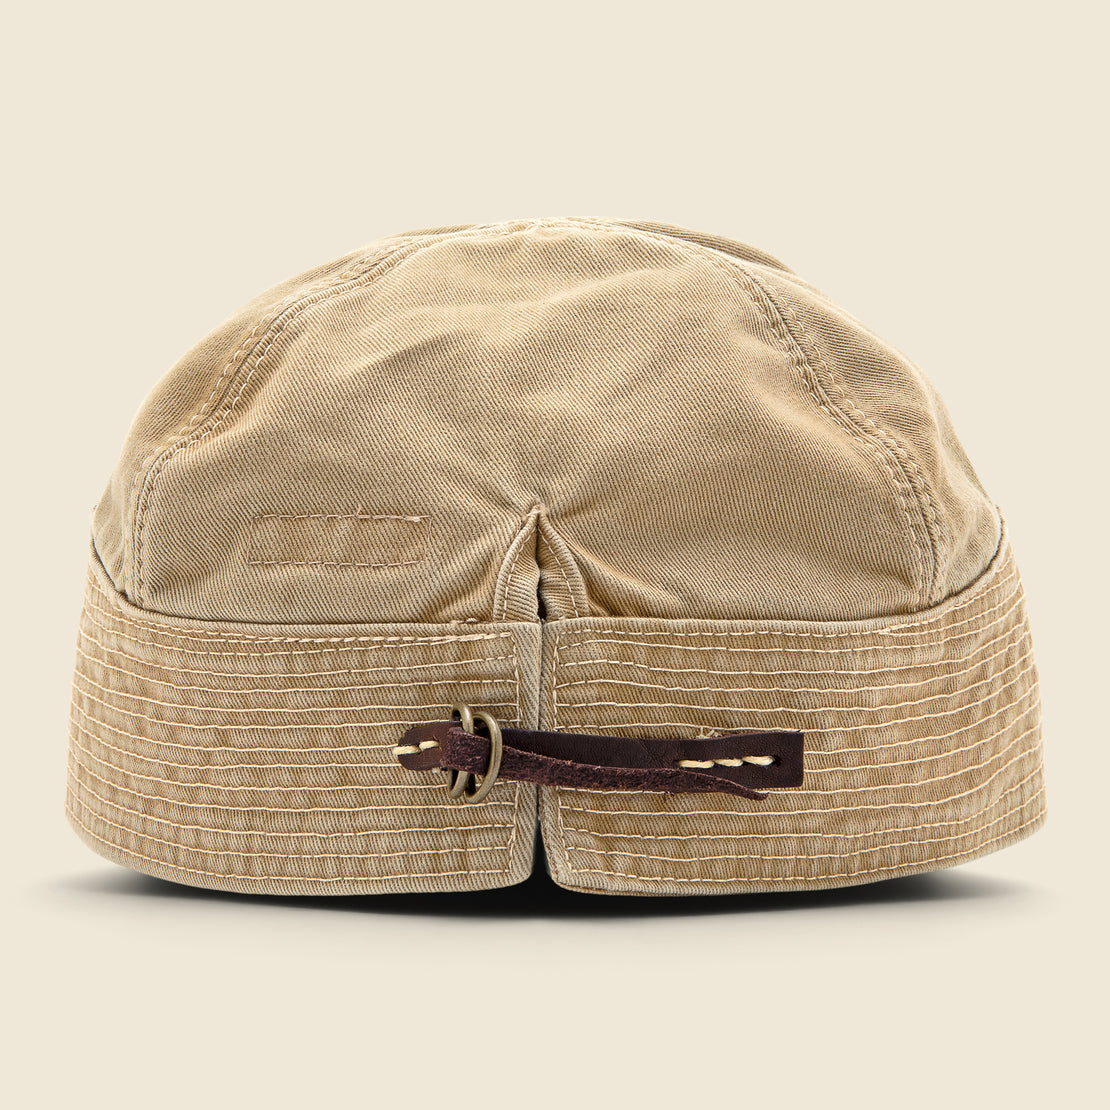 The Old Man and the Sea Chino Cap - Beige - Kapital - STAG Provisions - Accessories - Hats